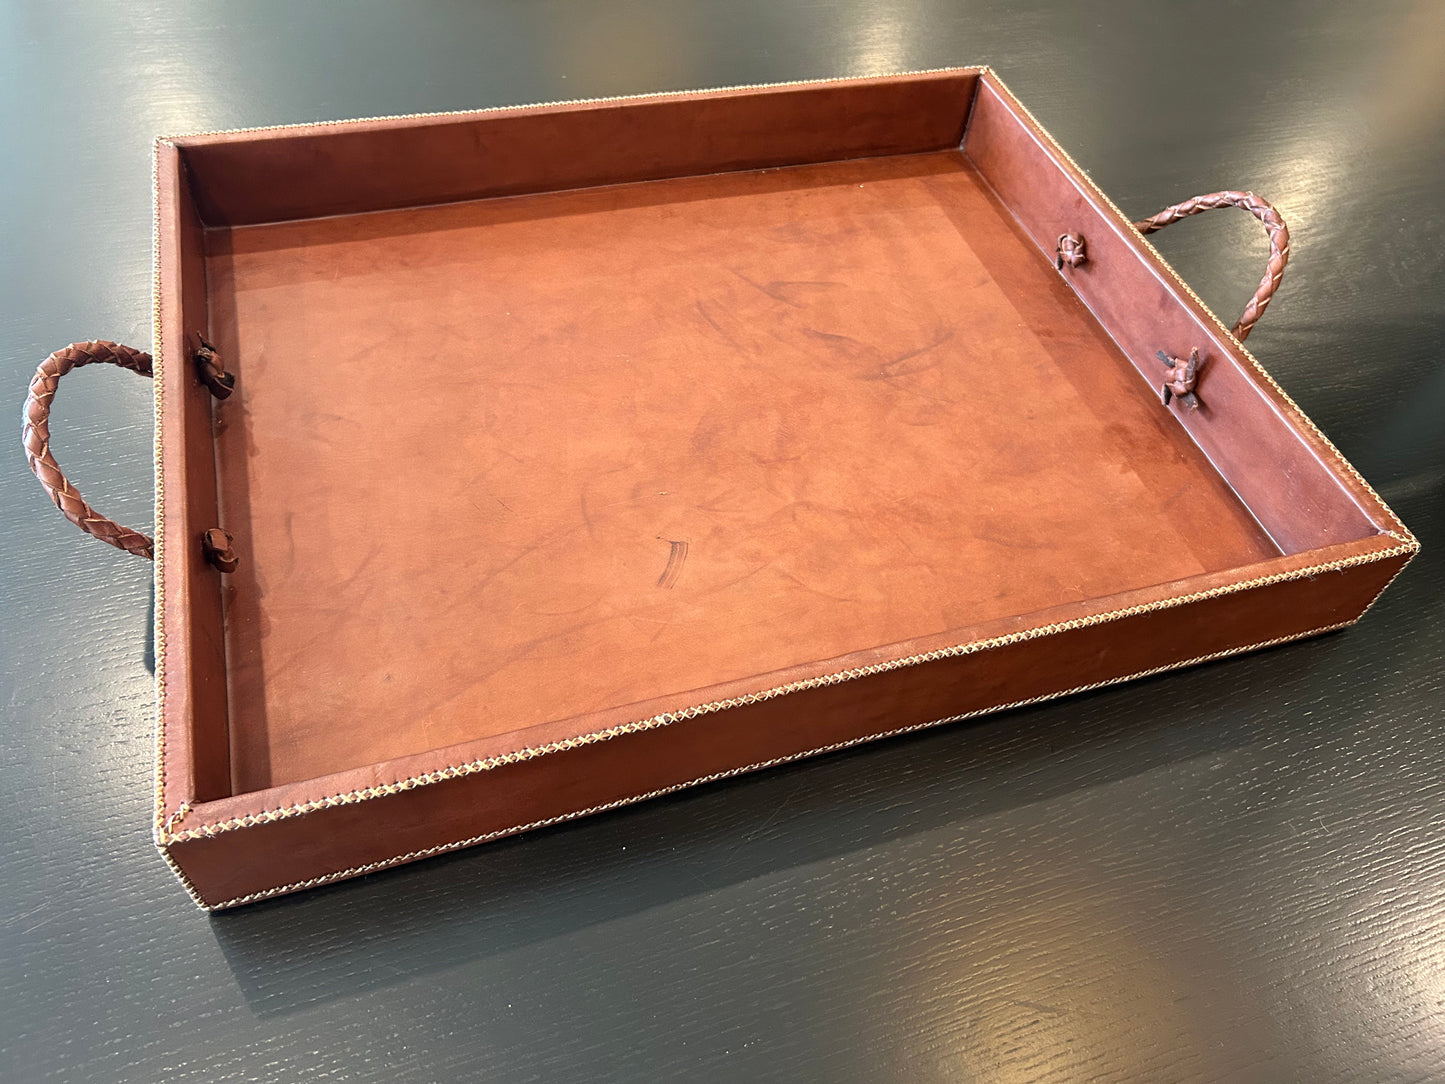 Grande XL Cedar + Leather Ottoman Tray with Embroidered Handles